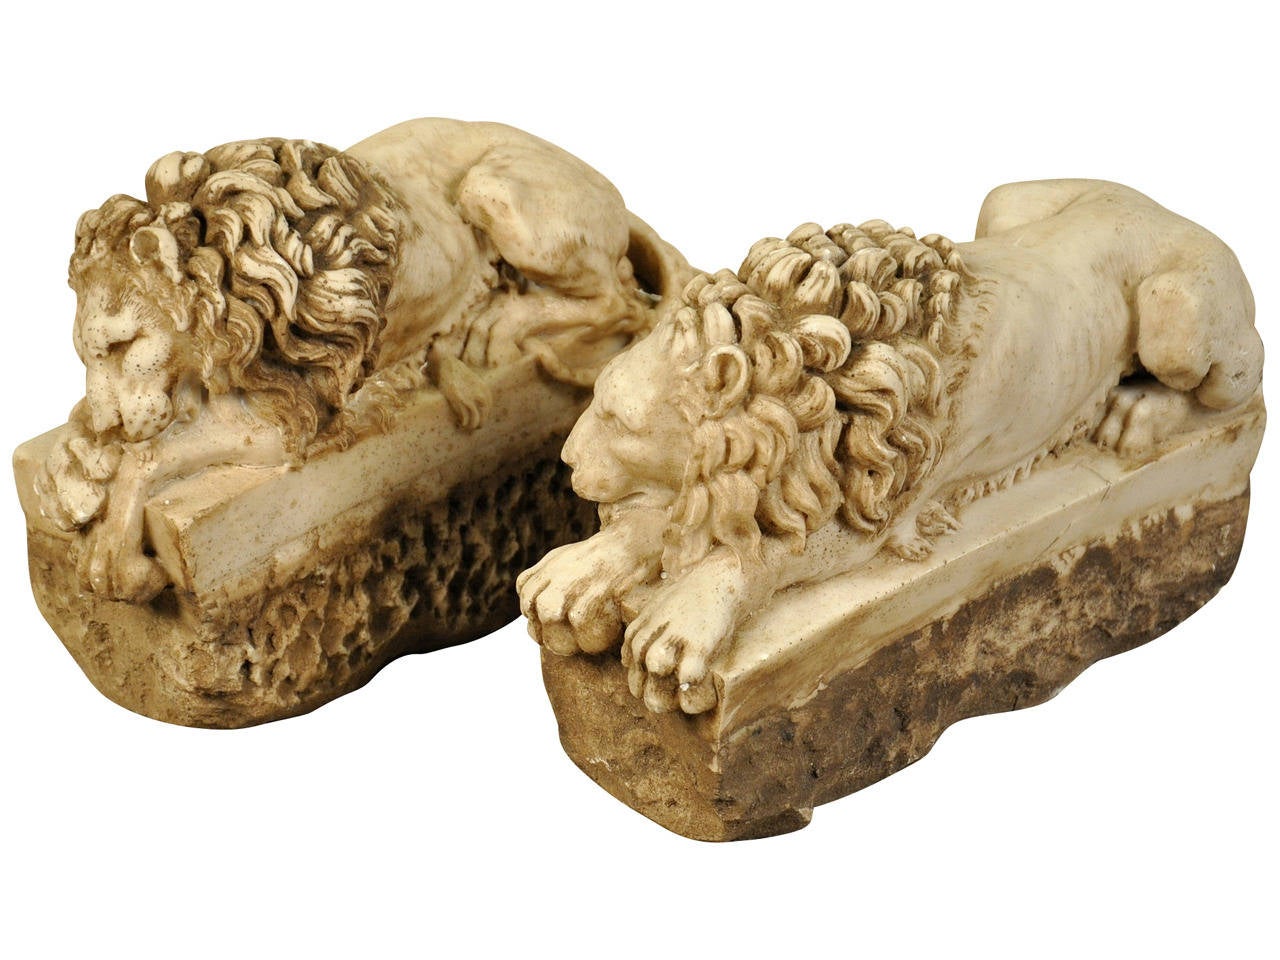 A stunning pair of diminutive hand carved marble lions from Italy.  The resting lions are carved on rectangular plinths atop a rough chiseled base. Both with unique positions of repose.  These lions were originally part of a larger structure.  These